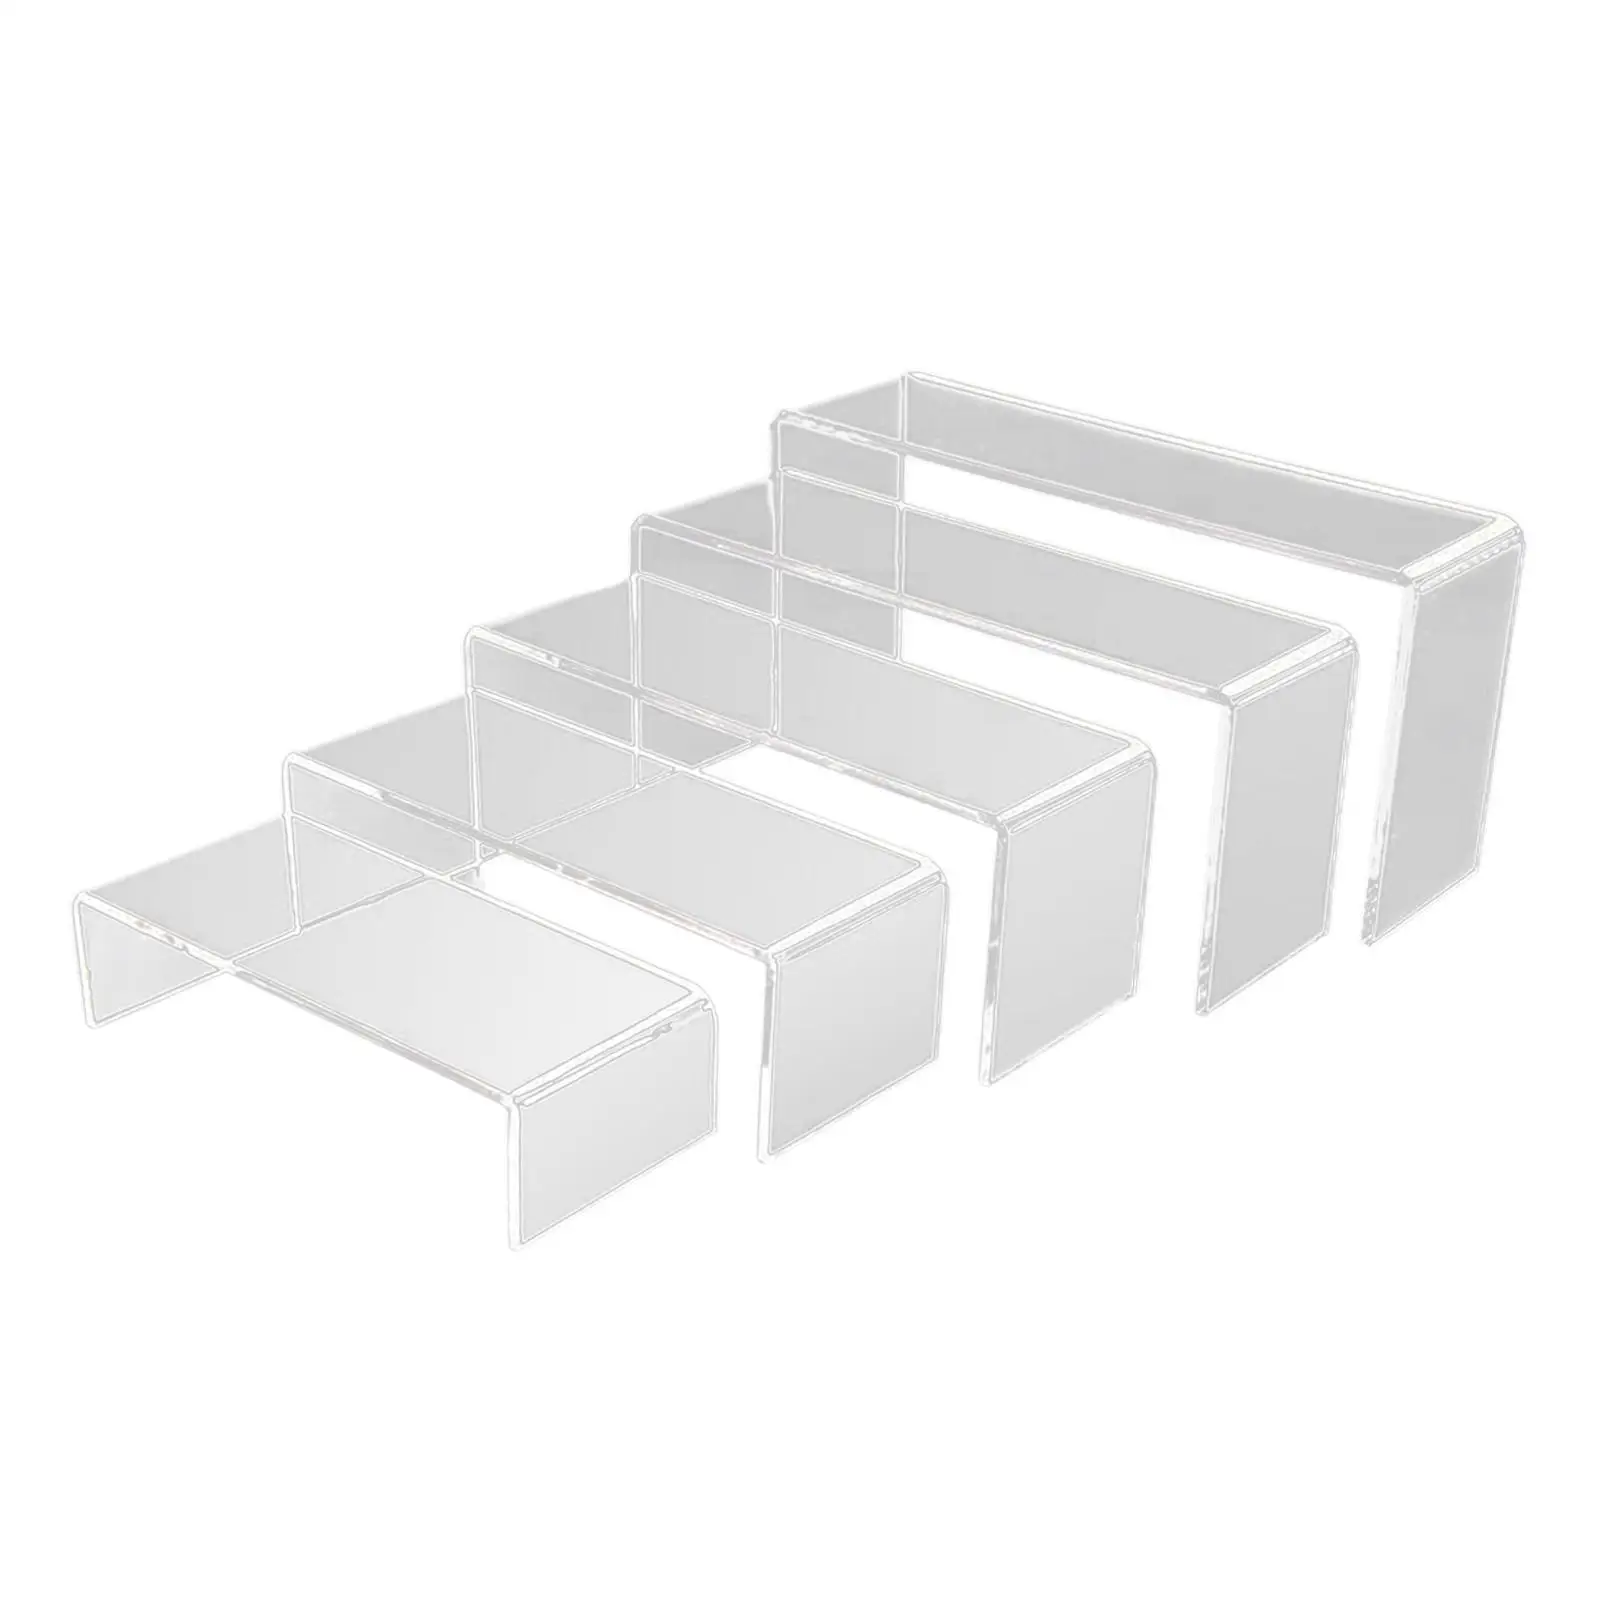 5x Acrylic Display Risers Display Collectibles for Jewelry Perfume Cupcakes